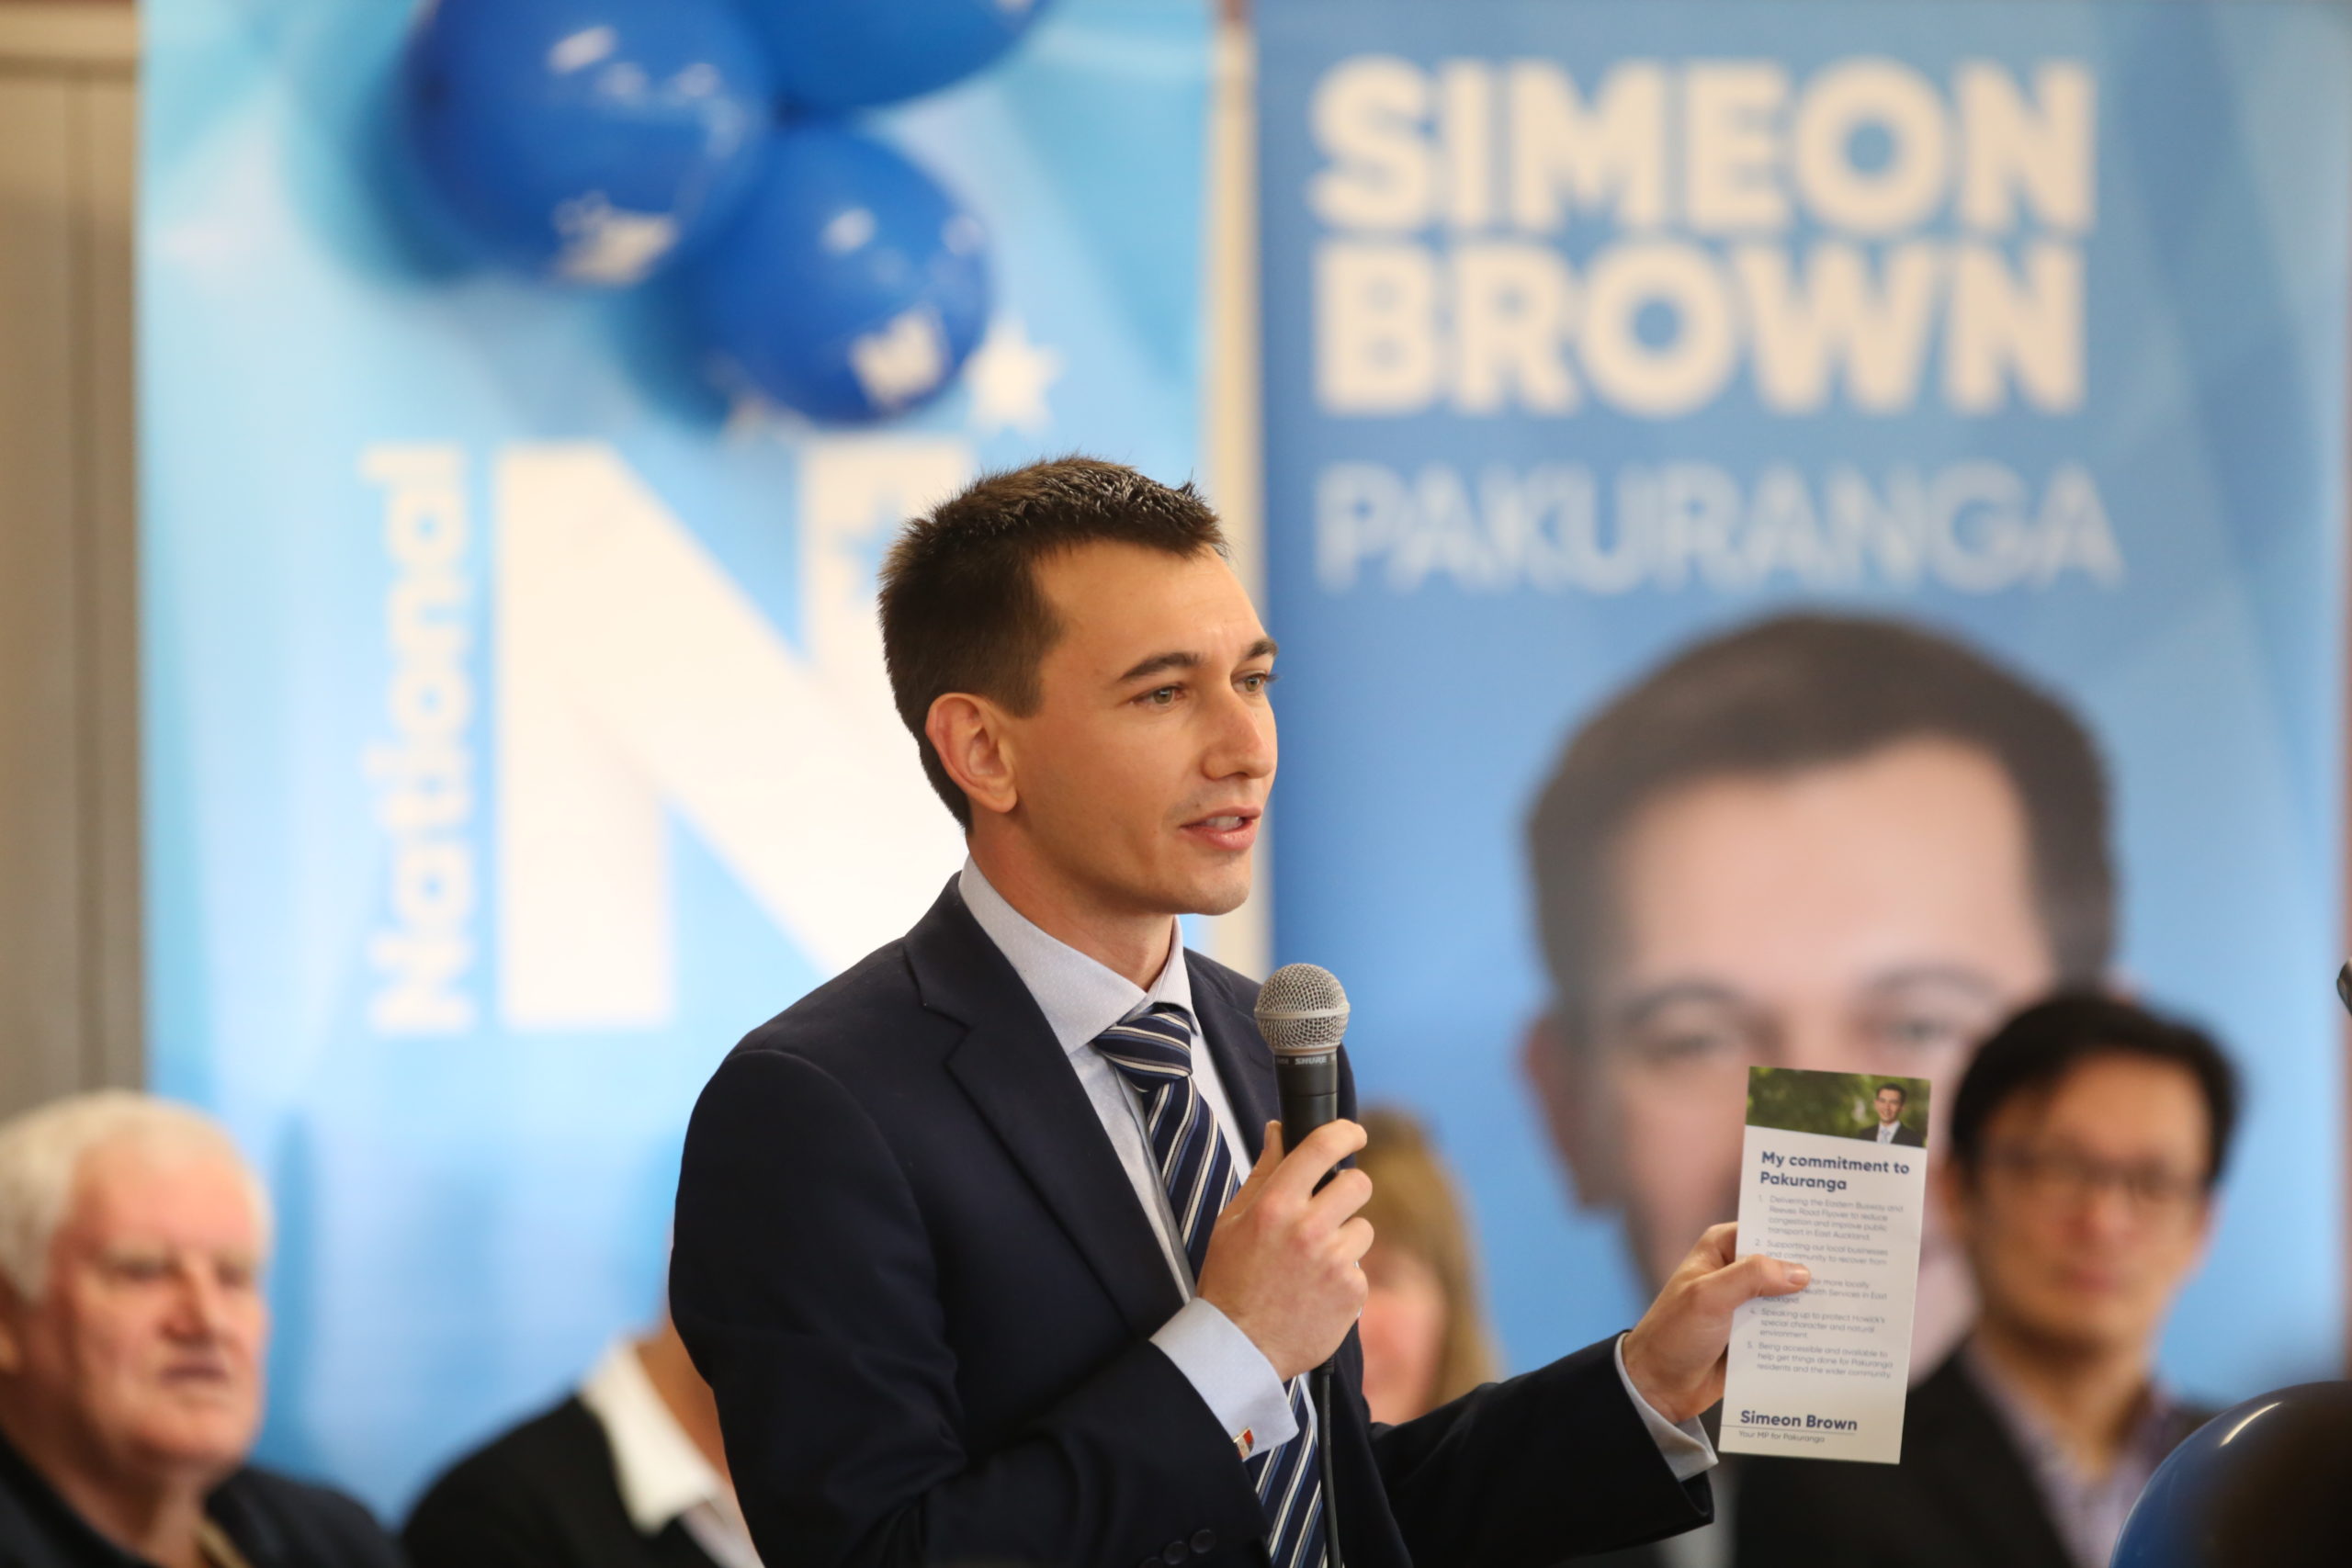 Simeon Brown confirmed as general election candidate - Times